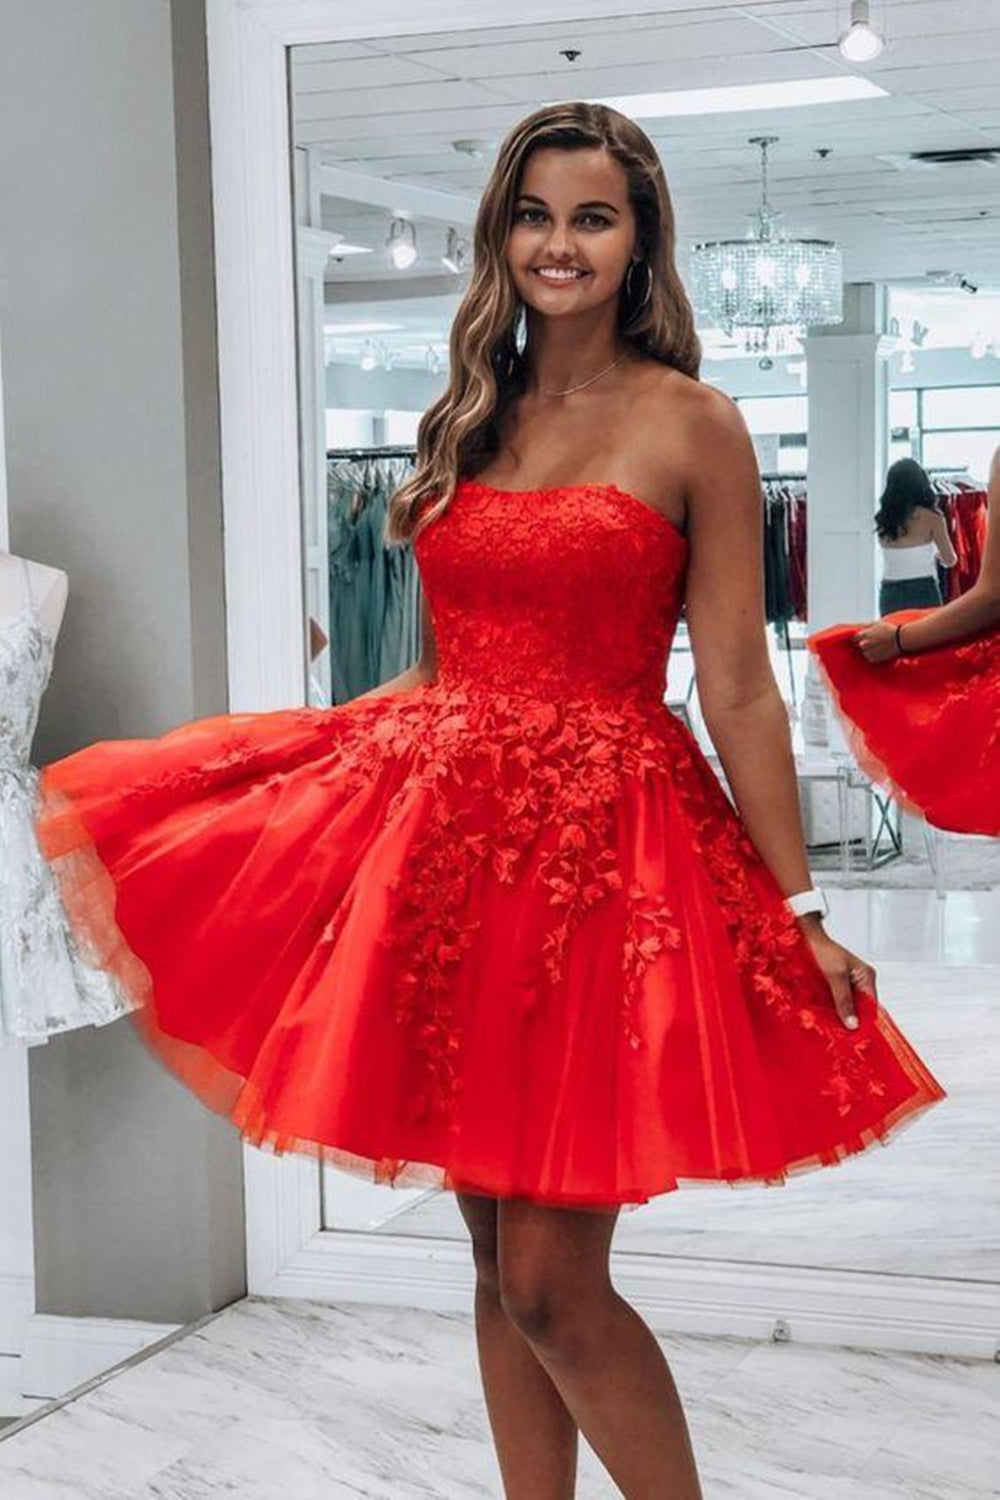 Strappy Lace Appliqued Red Short Homecoming Dress, 53% OFF